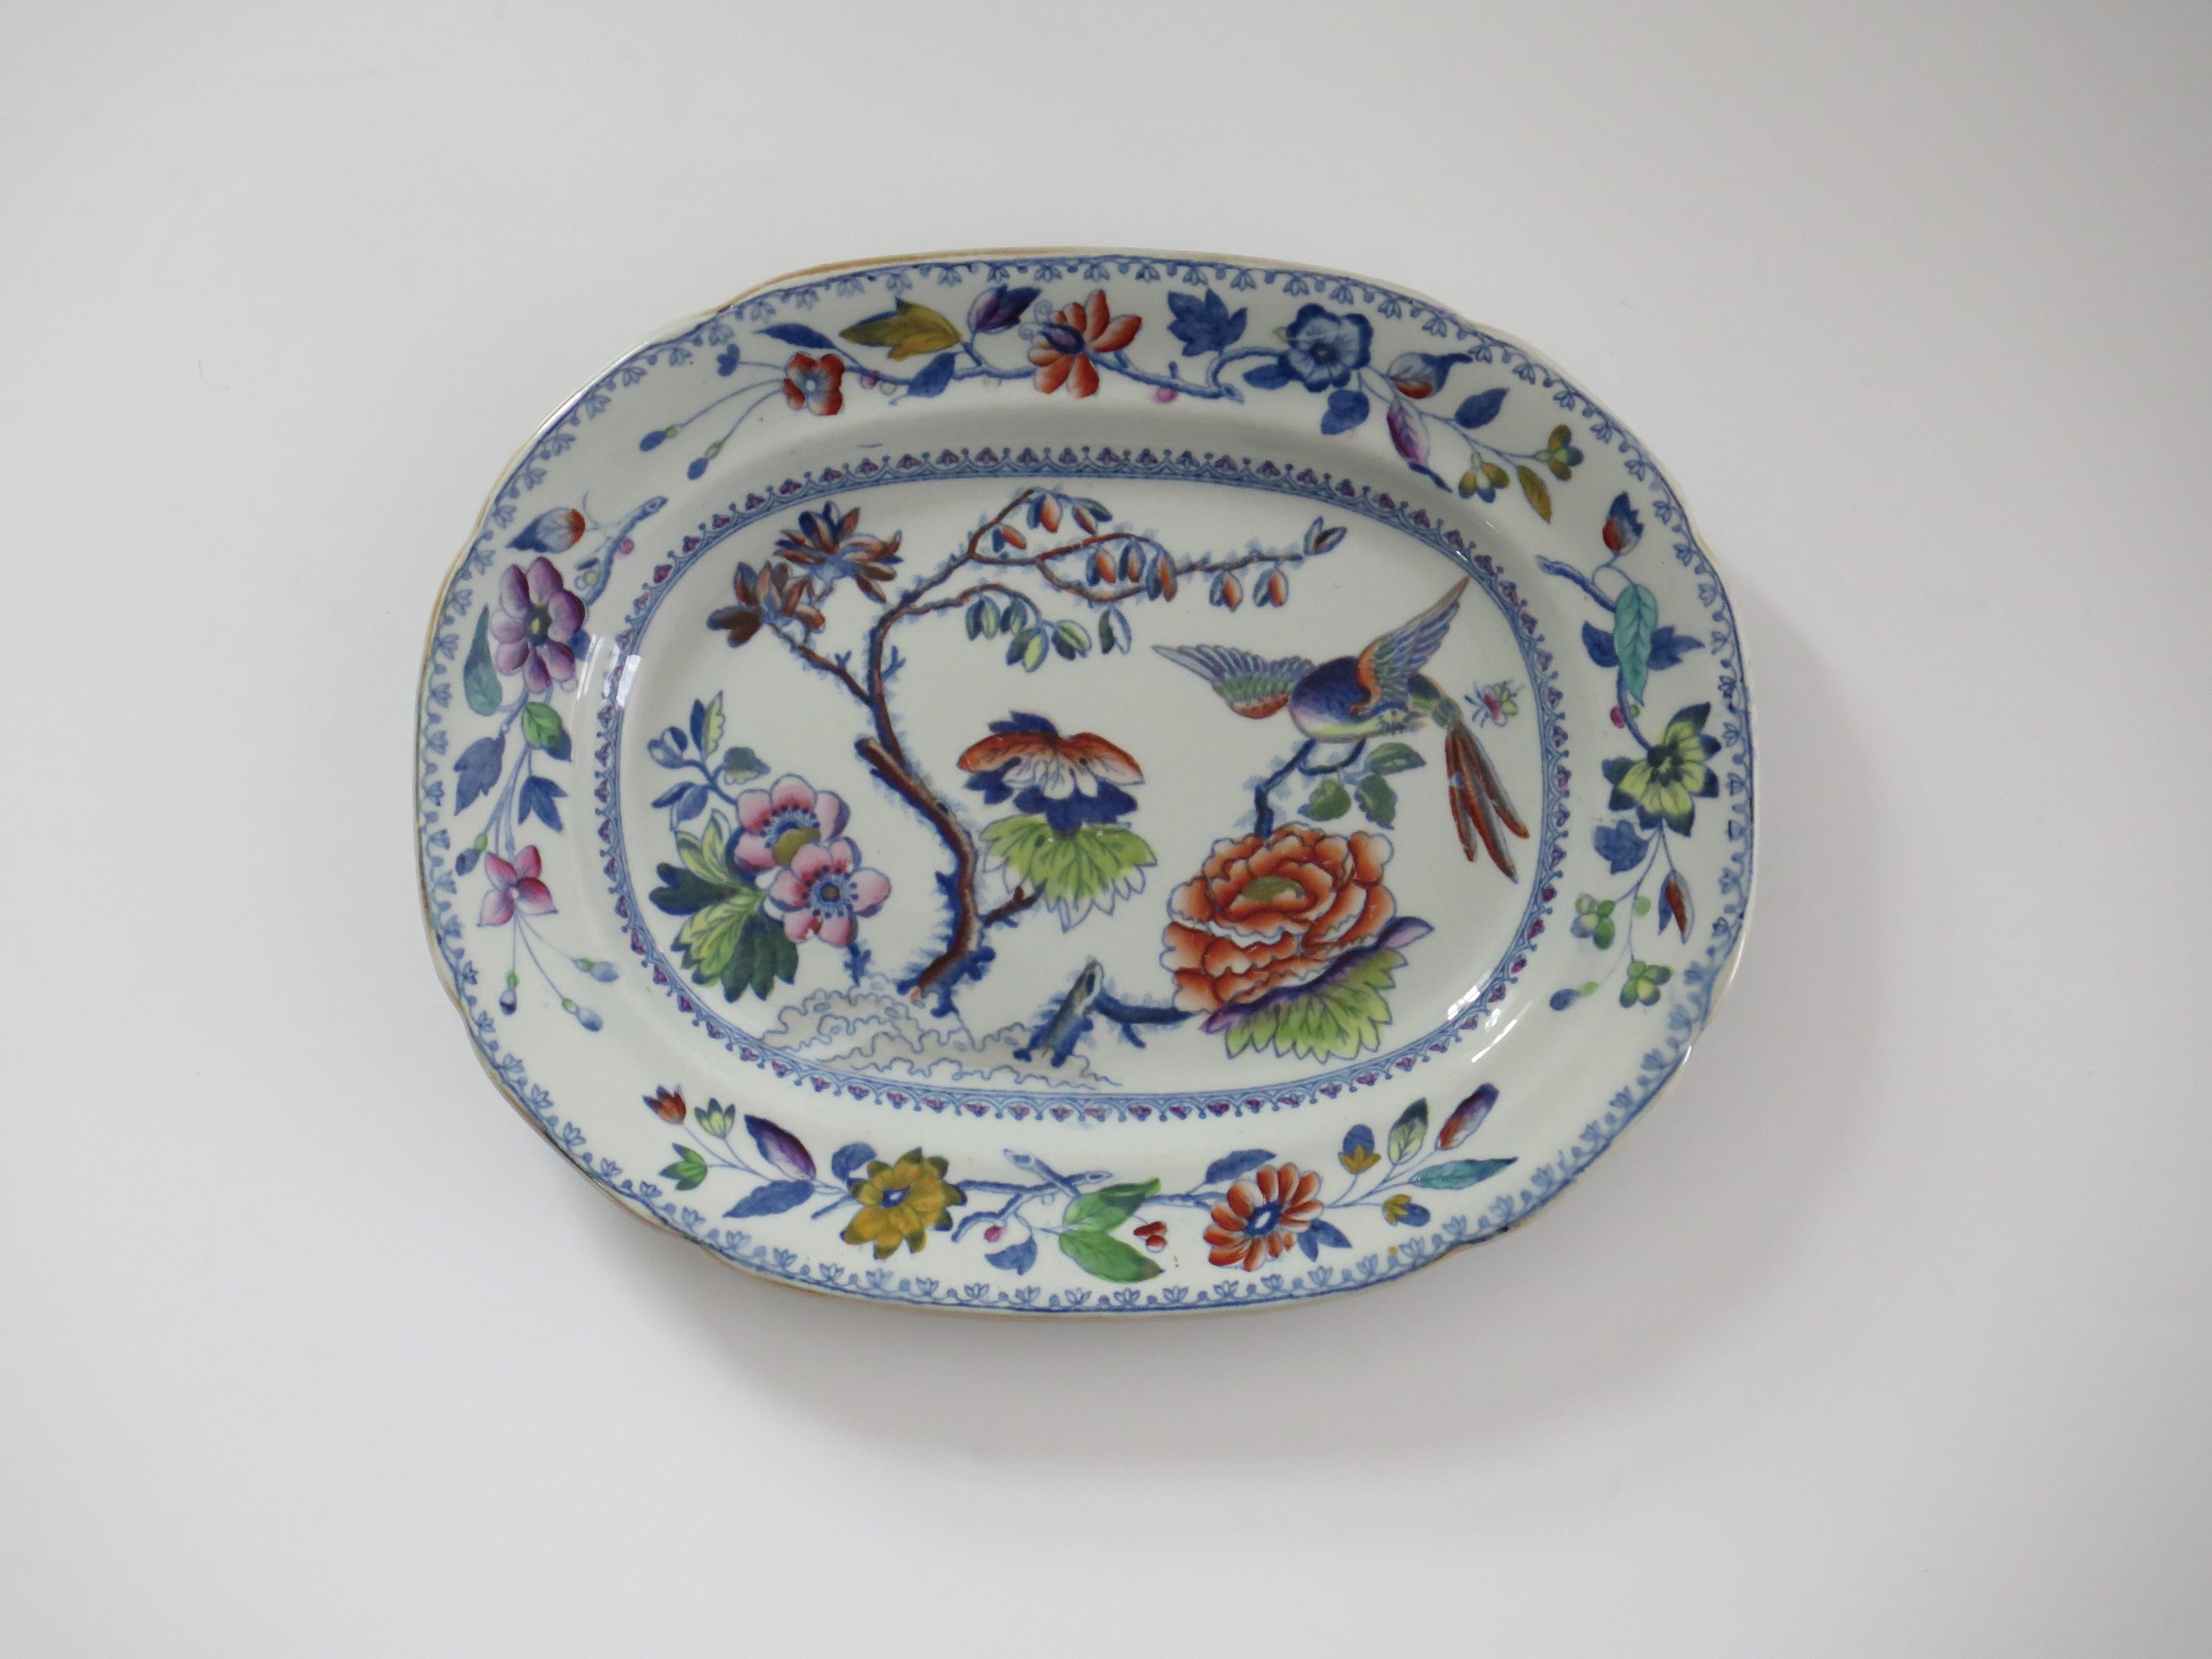 This is a good, hand painted ironstone (stone china) Platter, made by William Davenport and Co., Longport, Staffordshire Potteries, England, circa 1815.

The platter is well potted and hand painted, probably over a blue printed outline, in